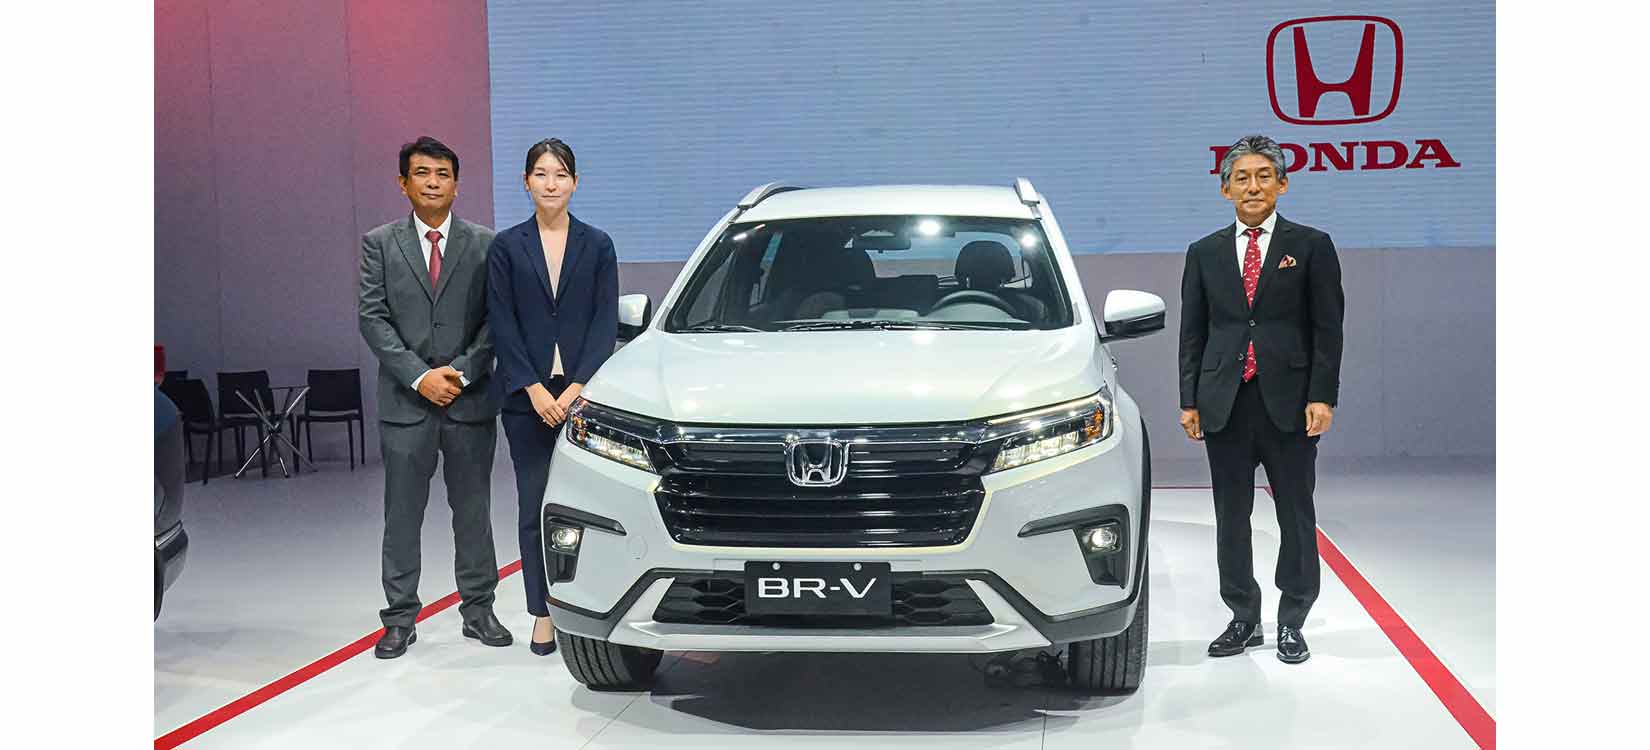 Honda’s Joyful, Safer World at the 8th Philippine International Motor Show featured the All-New HR-V RS and soon coming All-New BR-V and Honda CONNECT